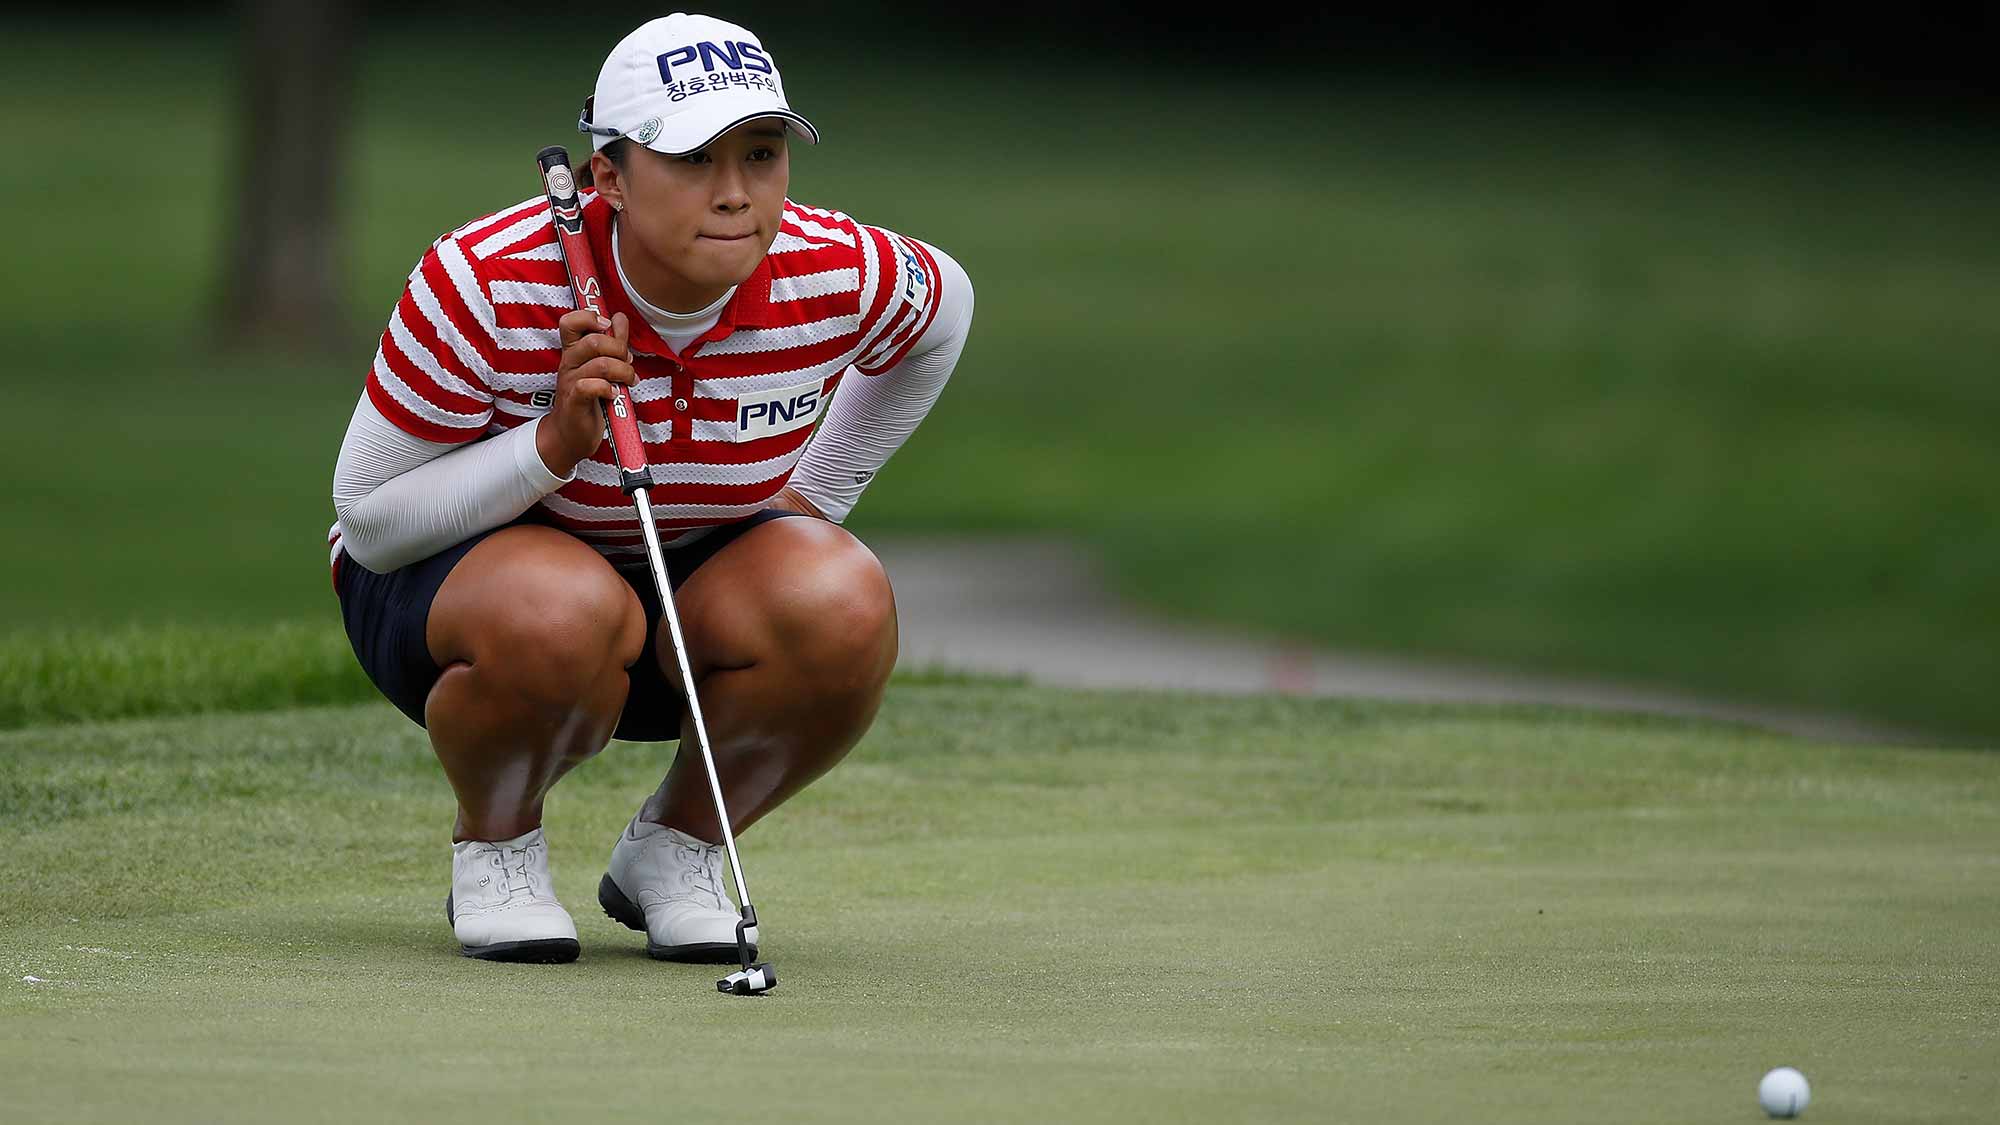 Amy Yang of South Korea reads a putt on the 12th green during the second round of the 2017 KPMG PGA Championship at Olympia Fields Country Club 